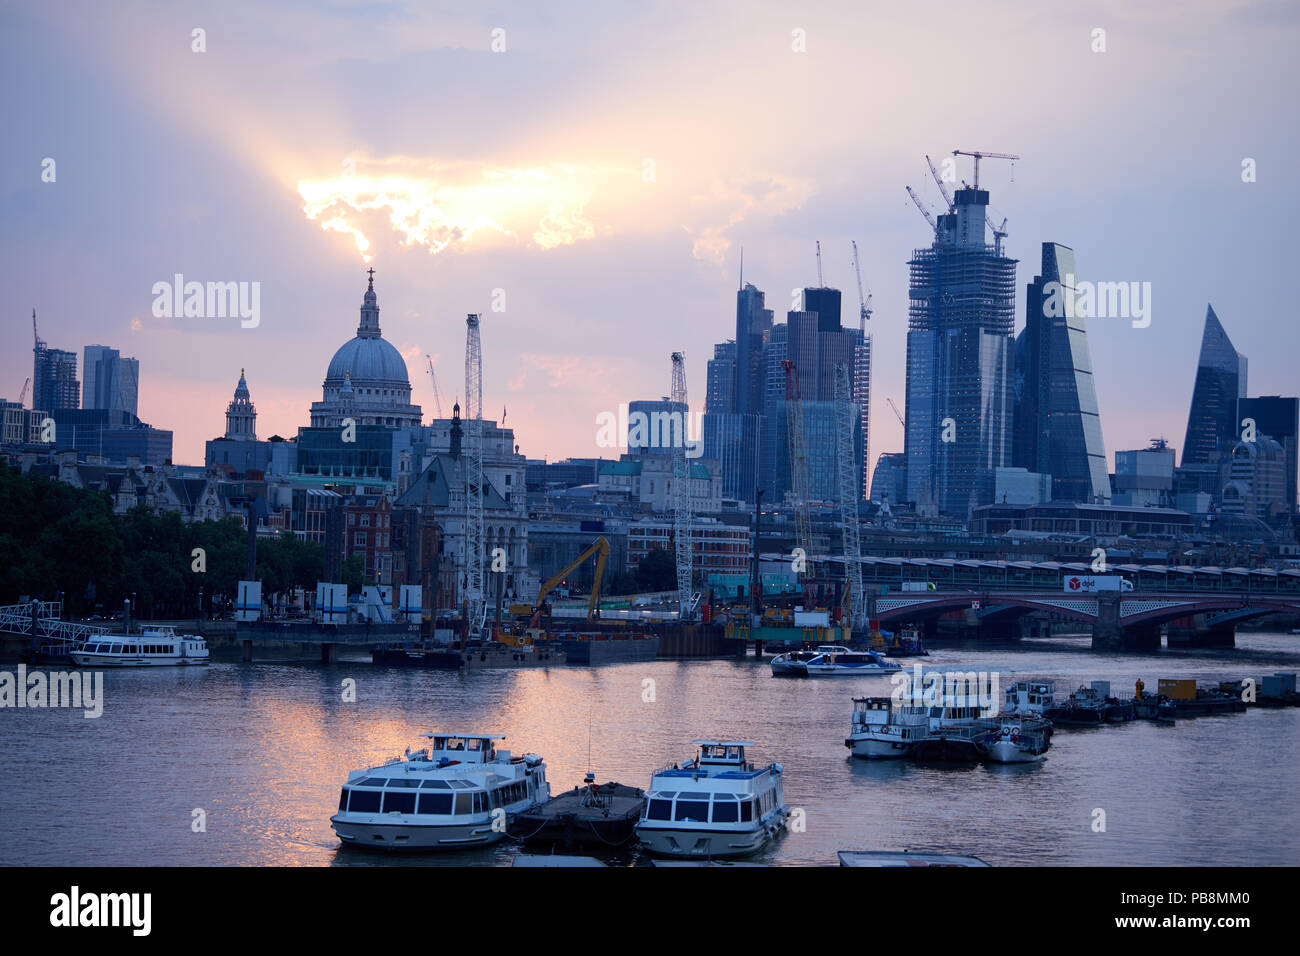 London, U.K. - 27 July 2018: Sunrise over the London skyline on what is predicted to be the hottest day of the year. Credit: Kevin Frost/Alamy Live News Stock Photo